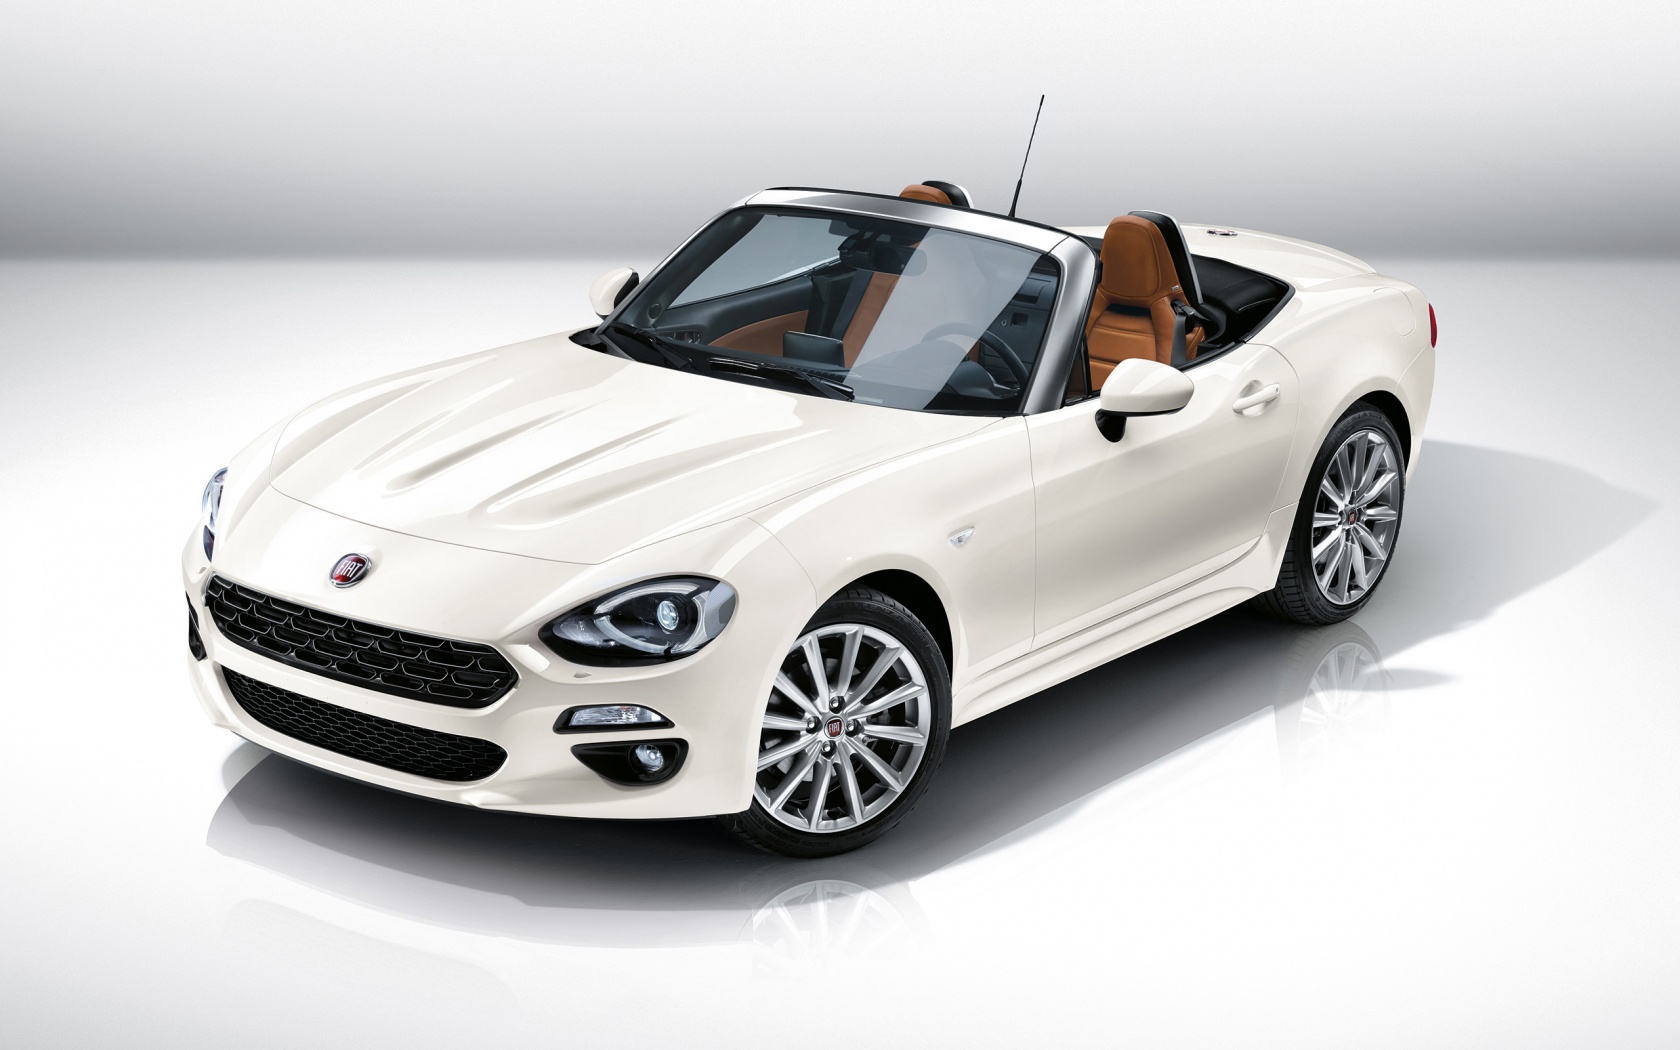 2017 Fiat 124 Spider Wallpapers In Jpg Format For Free Download